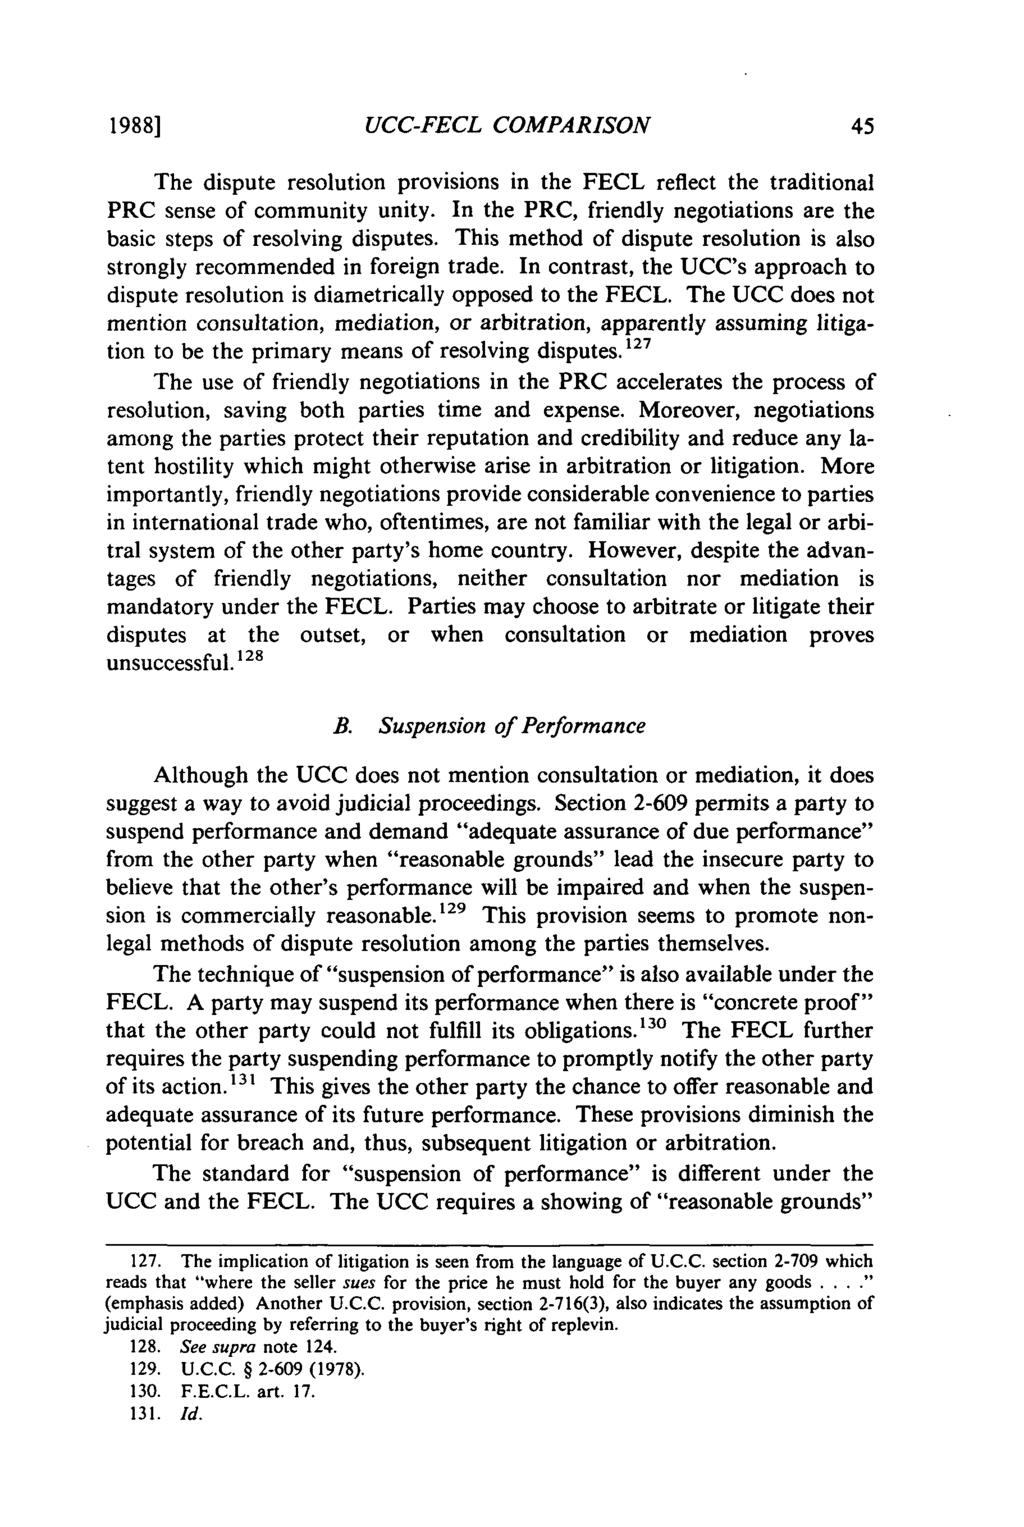 1988] UCC-FECL COMPARISON The dispute resolution provisions in the FECL reflect the traditional PRC sense of community unity.